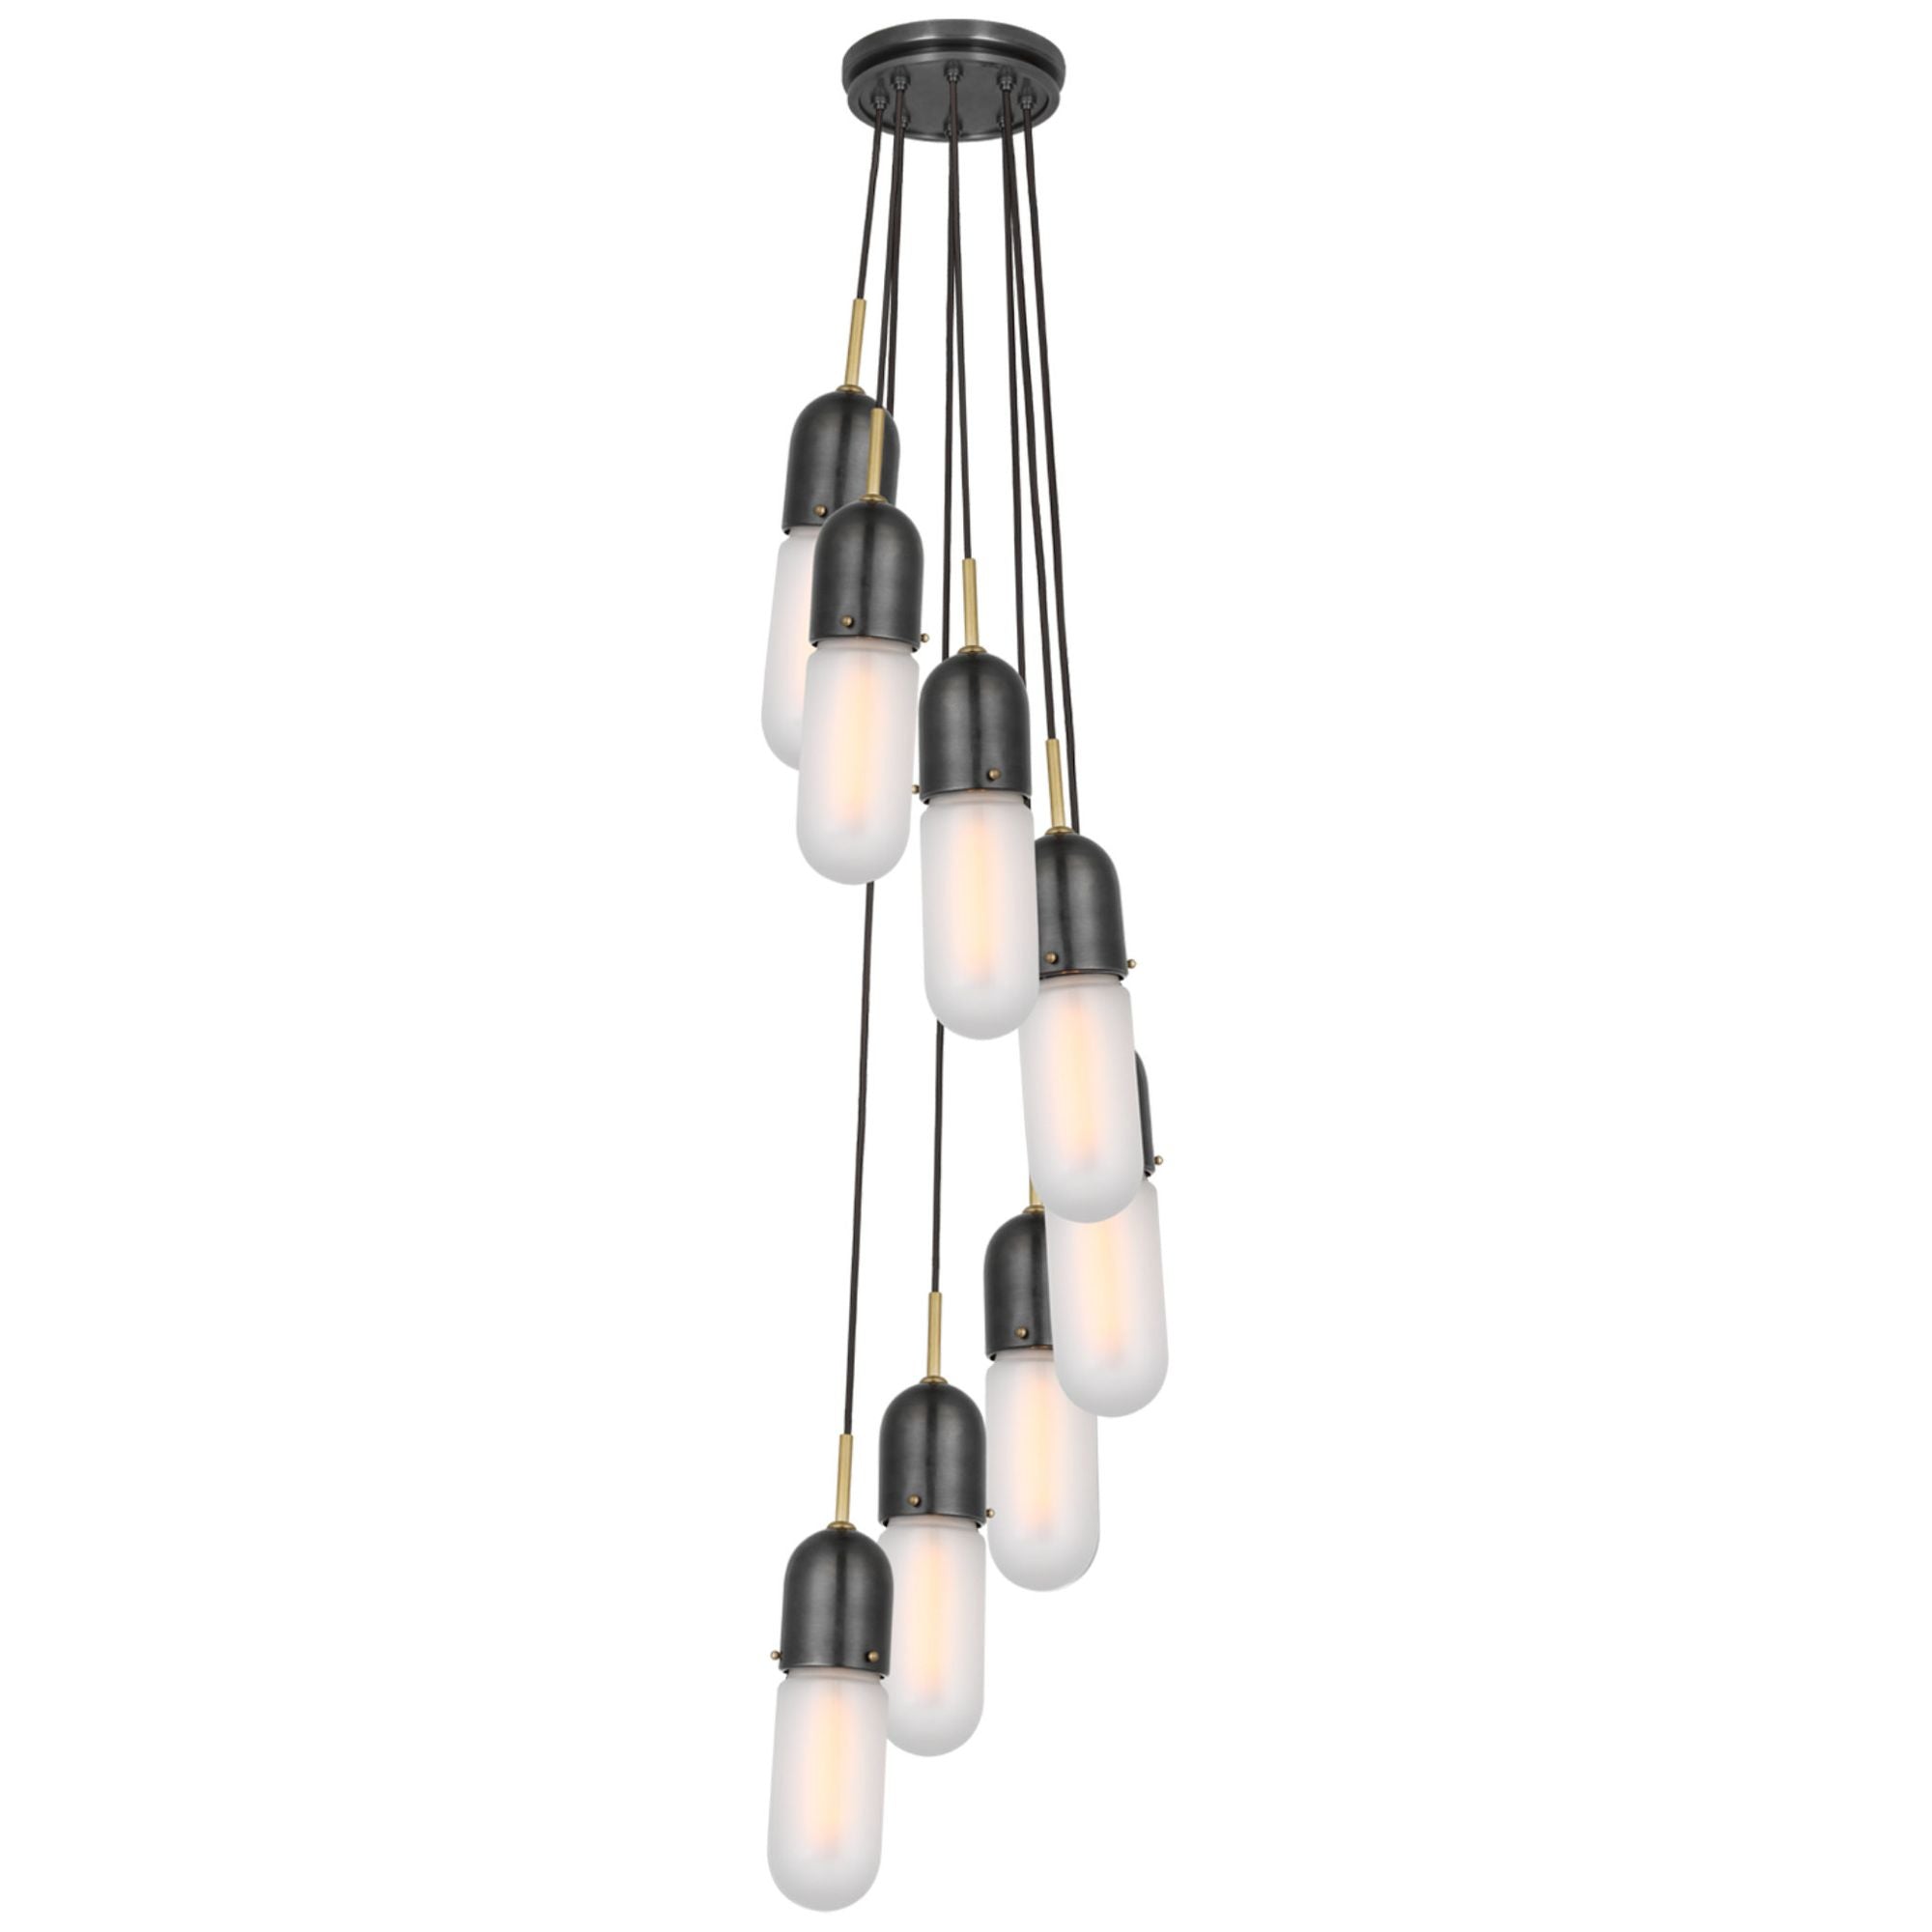 Thomas O'Brien Junio 8-Light Pendant in Bronze and Brass with Frosted Glass